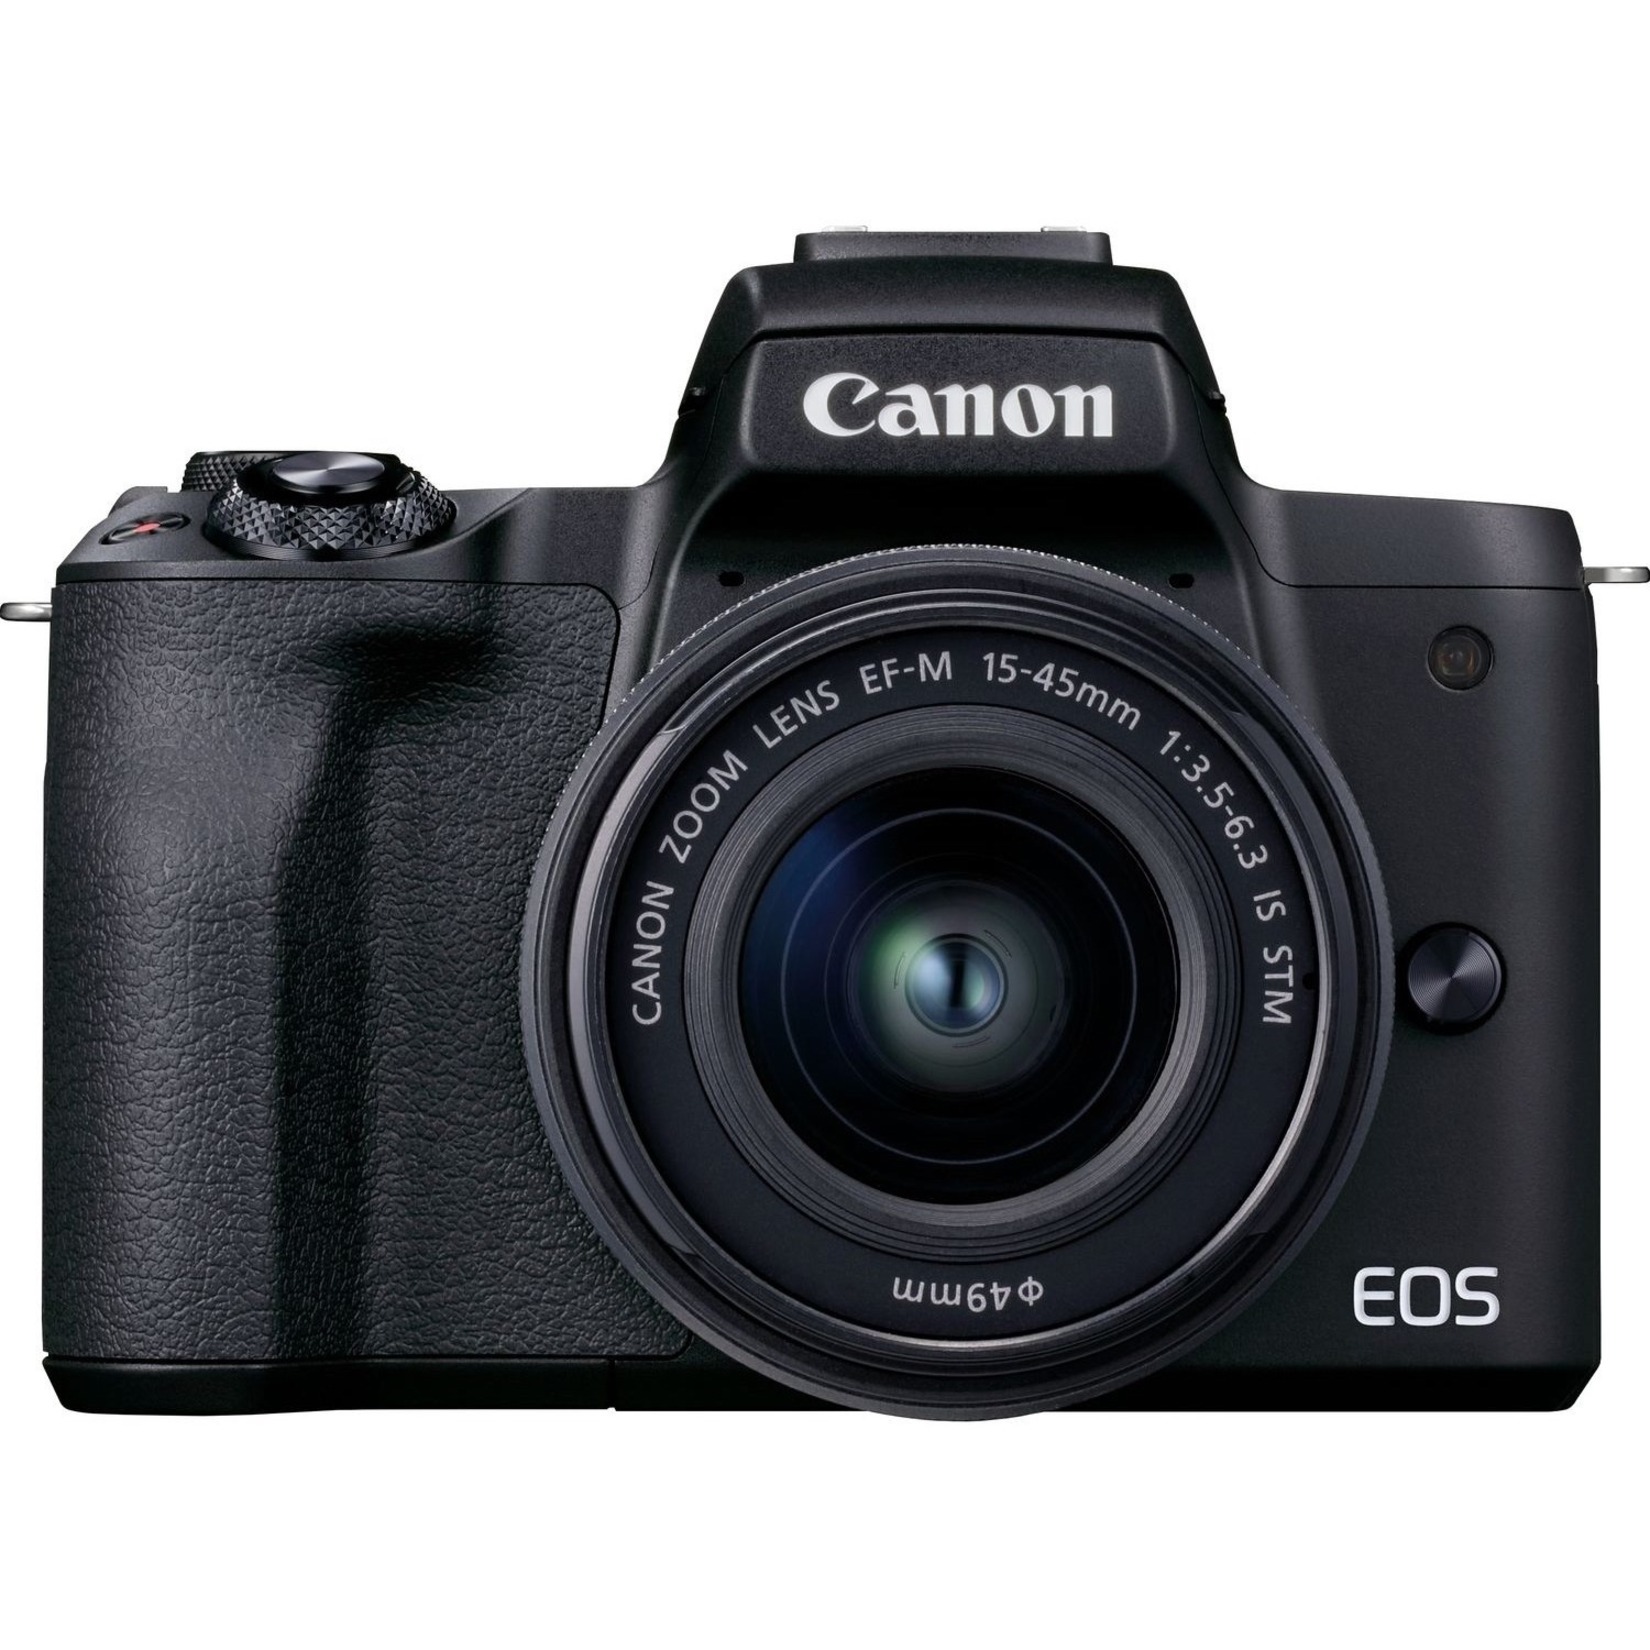 Canon EOS M50 Mark II 24.1 Megapixel Mirrorless Camera with Lens, 0.59", 1.77", Black - image 4 of 23